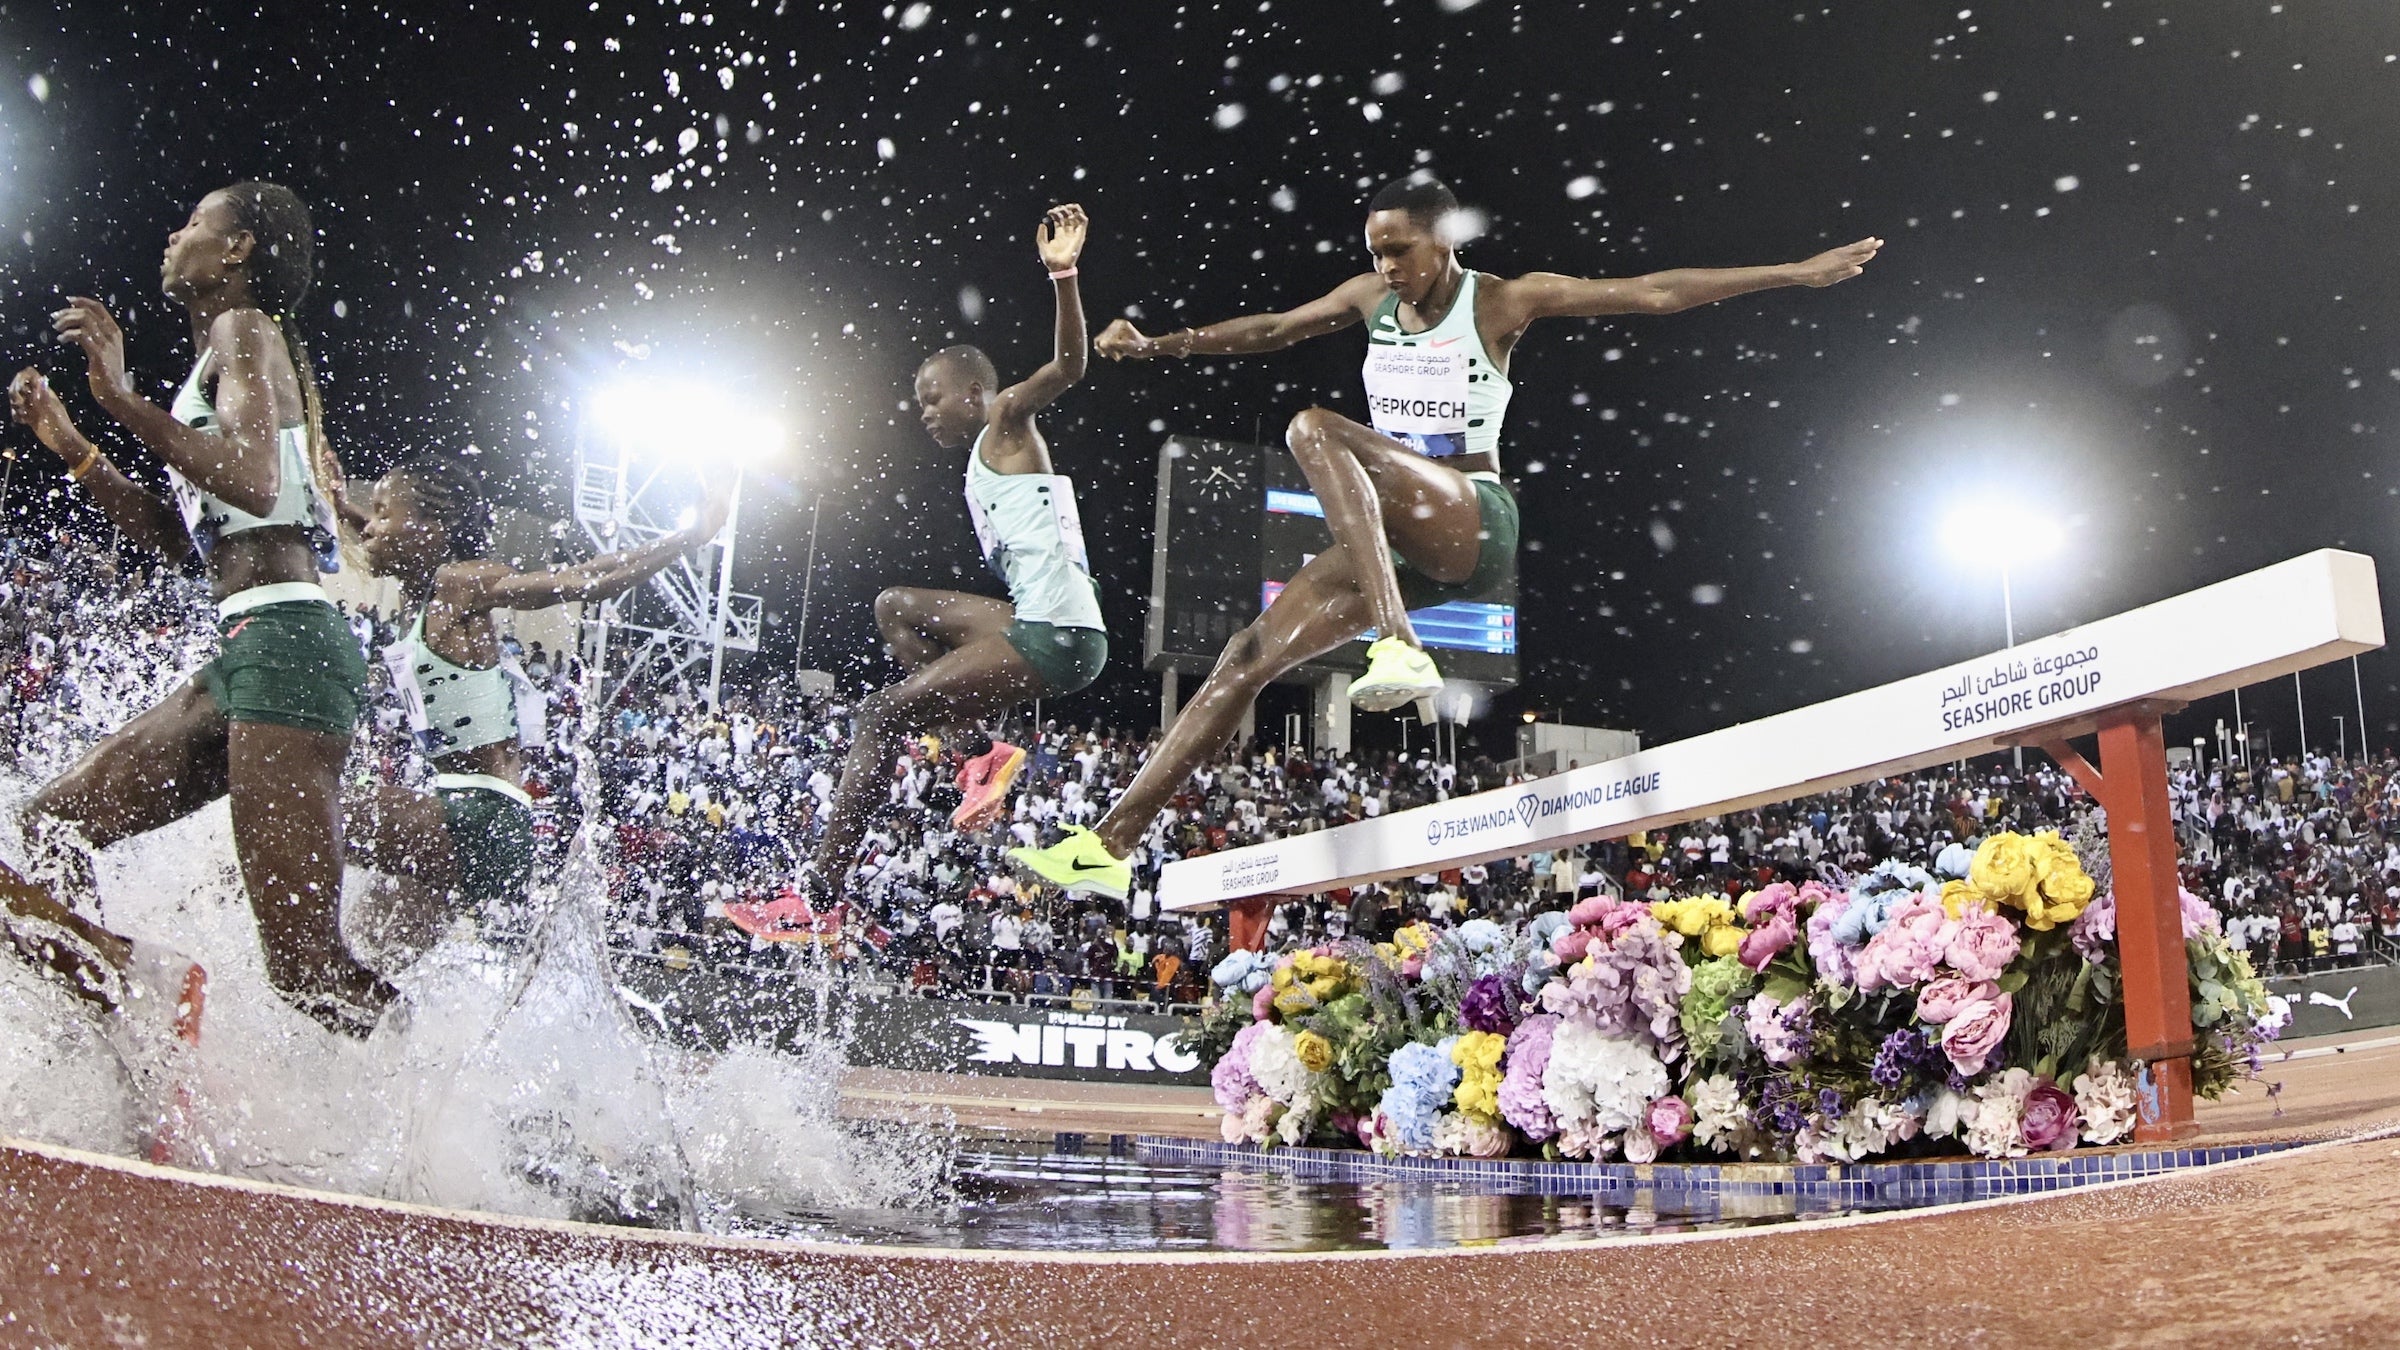 10 Stunning Performances from the U.S. Track and Field Championships